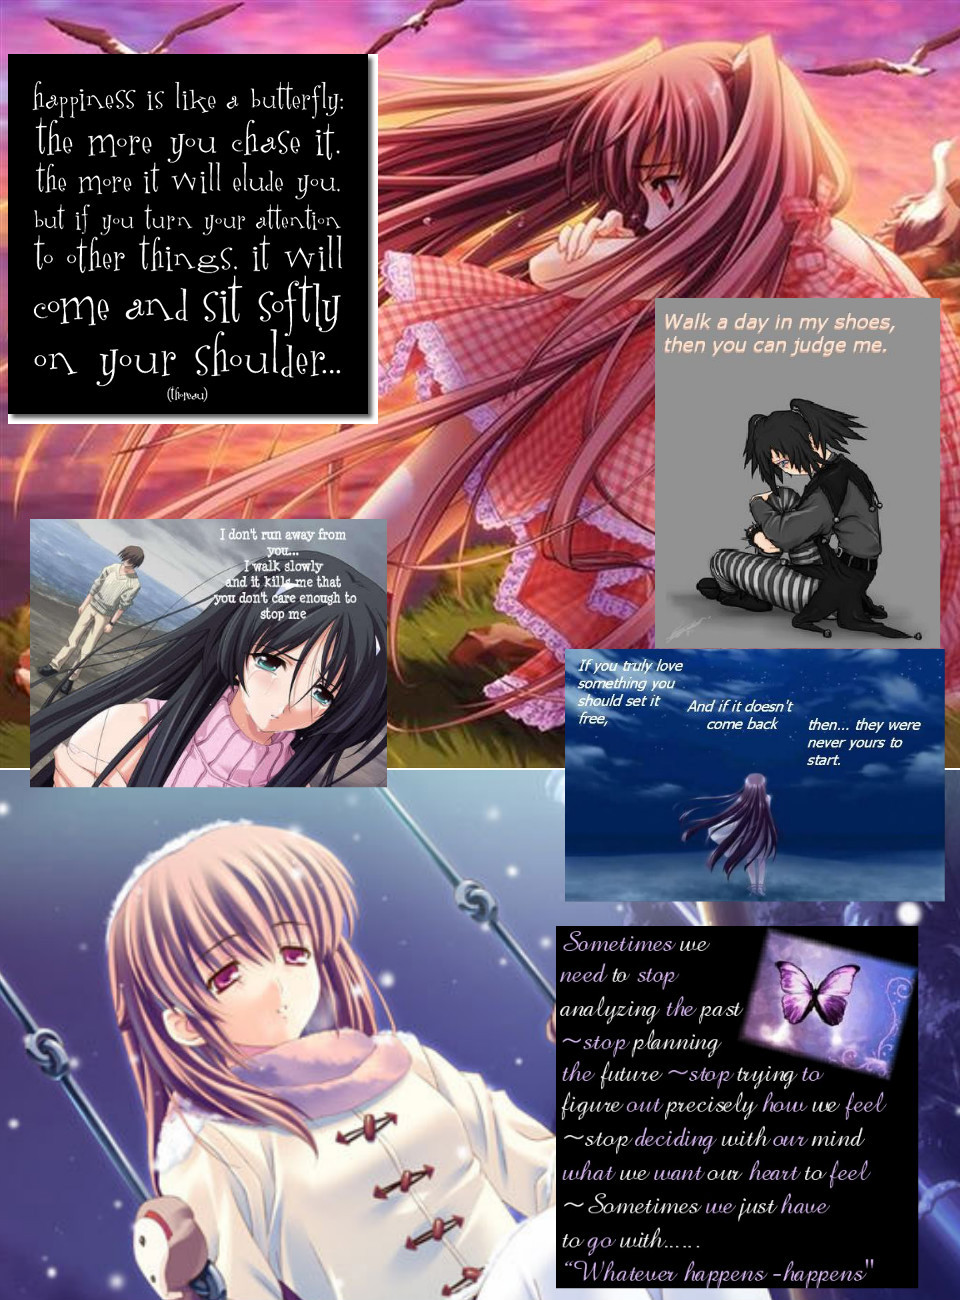 Sad Anime Quotes About Love